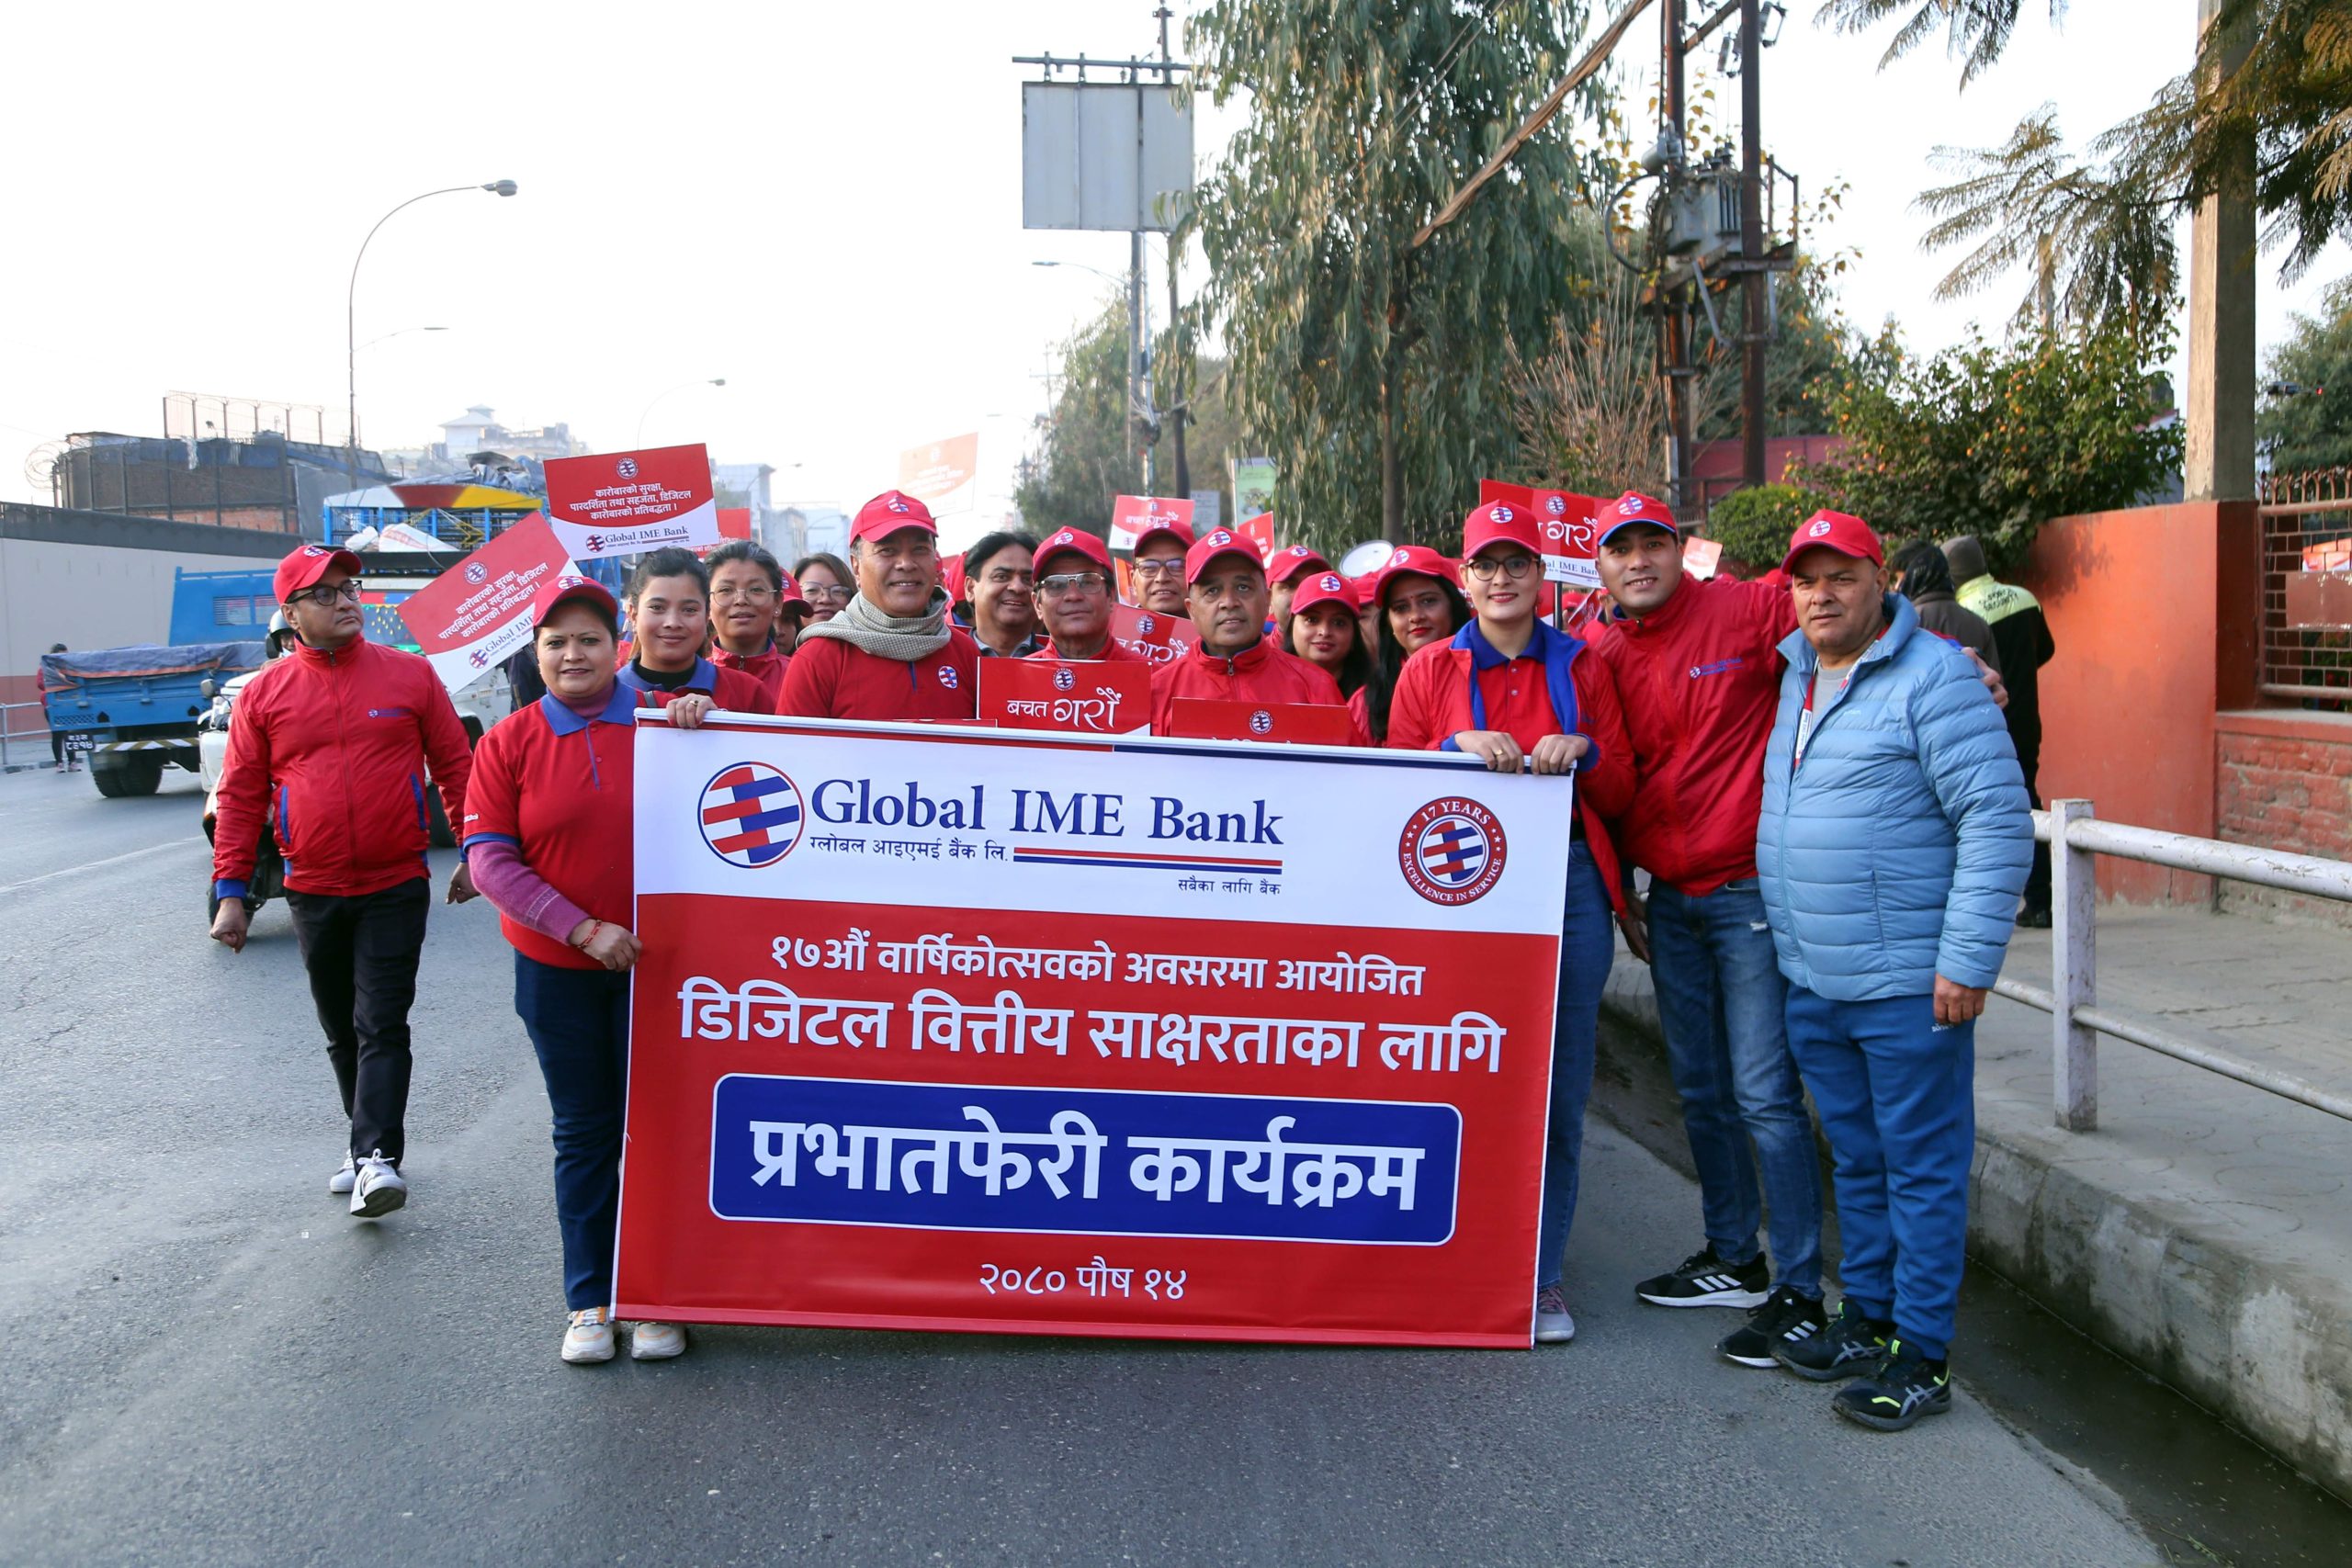 Global IME Bank celebrates 17th anniversary with nationwide wakathon for financial literacy